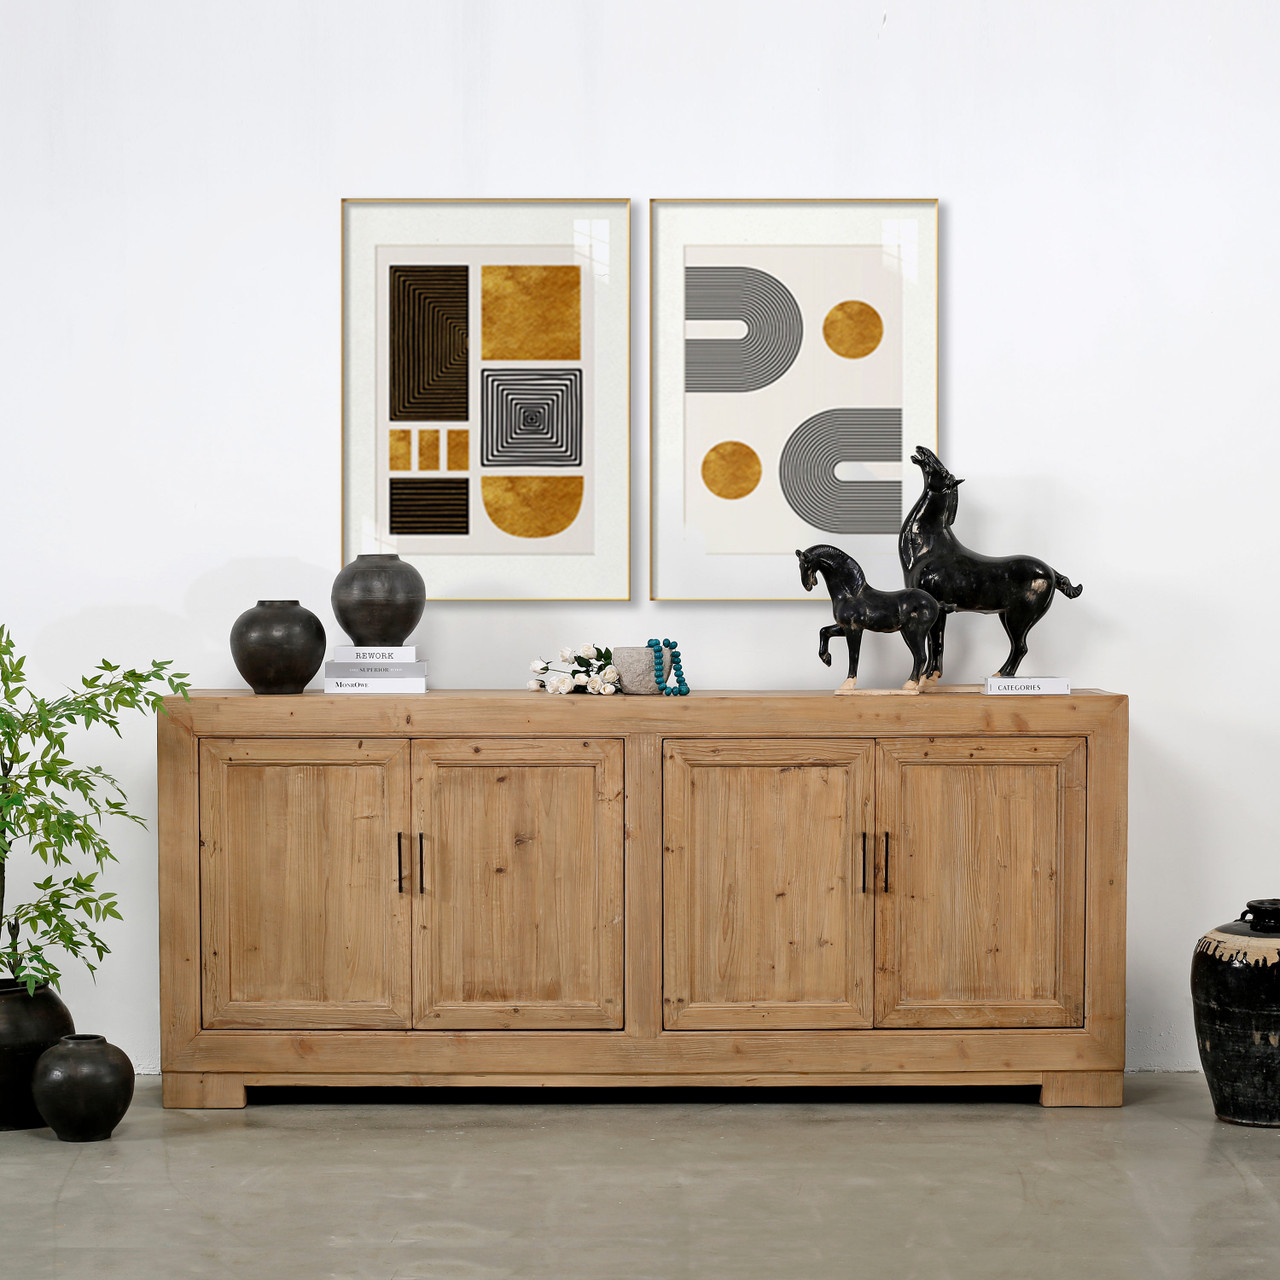 Capri Four Doors Tall Sideboard Weathered Natural Pine Warm Wood Tone  101x18x43H - Lilys Living